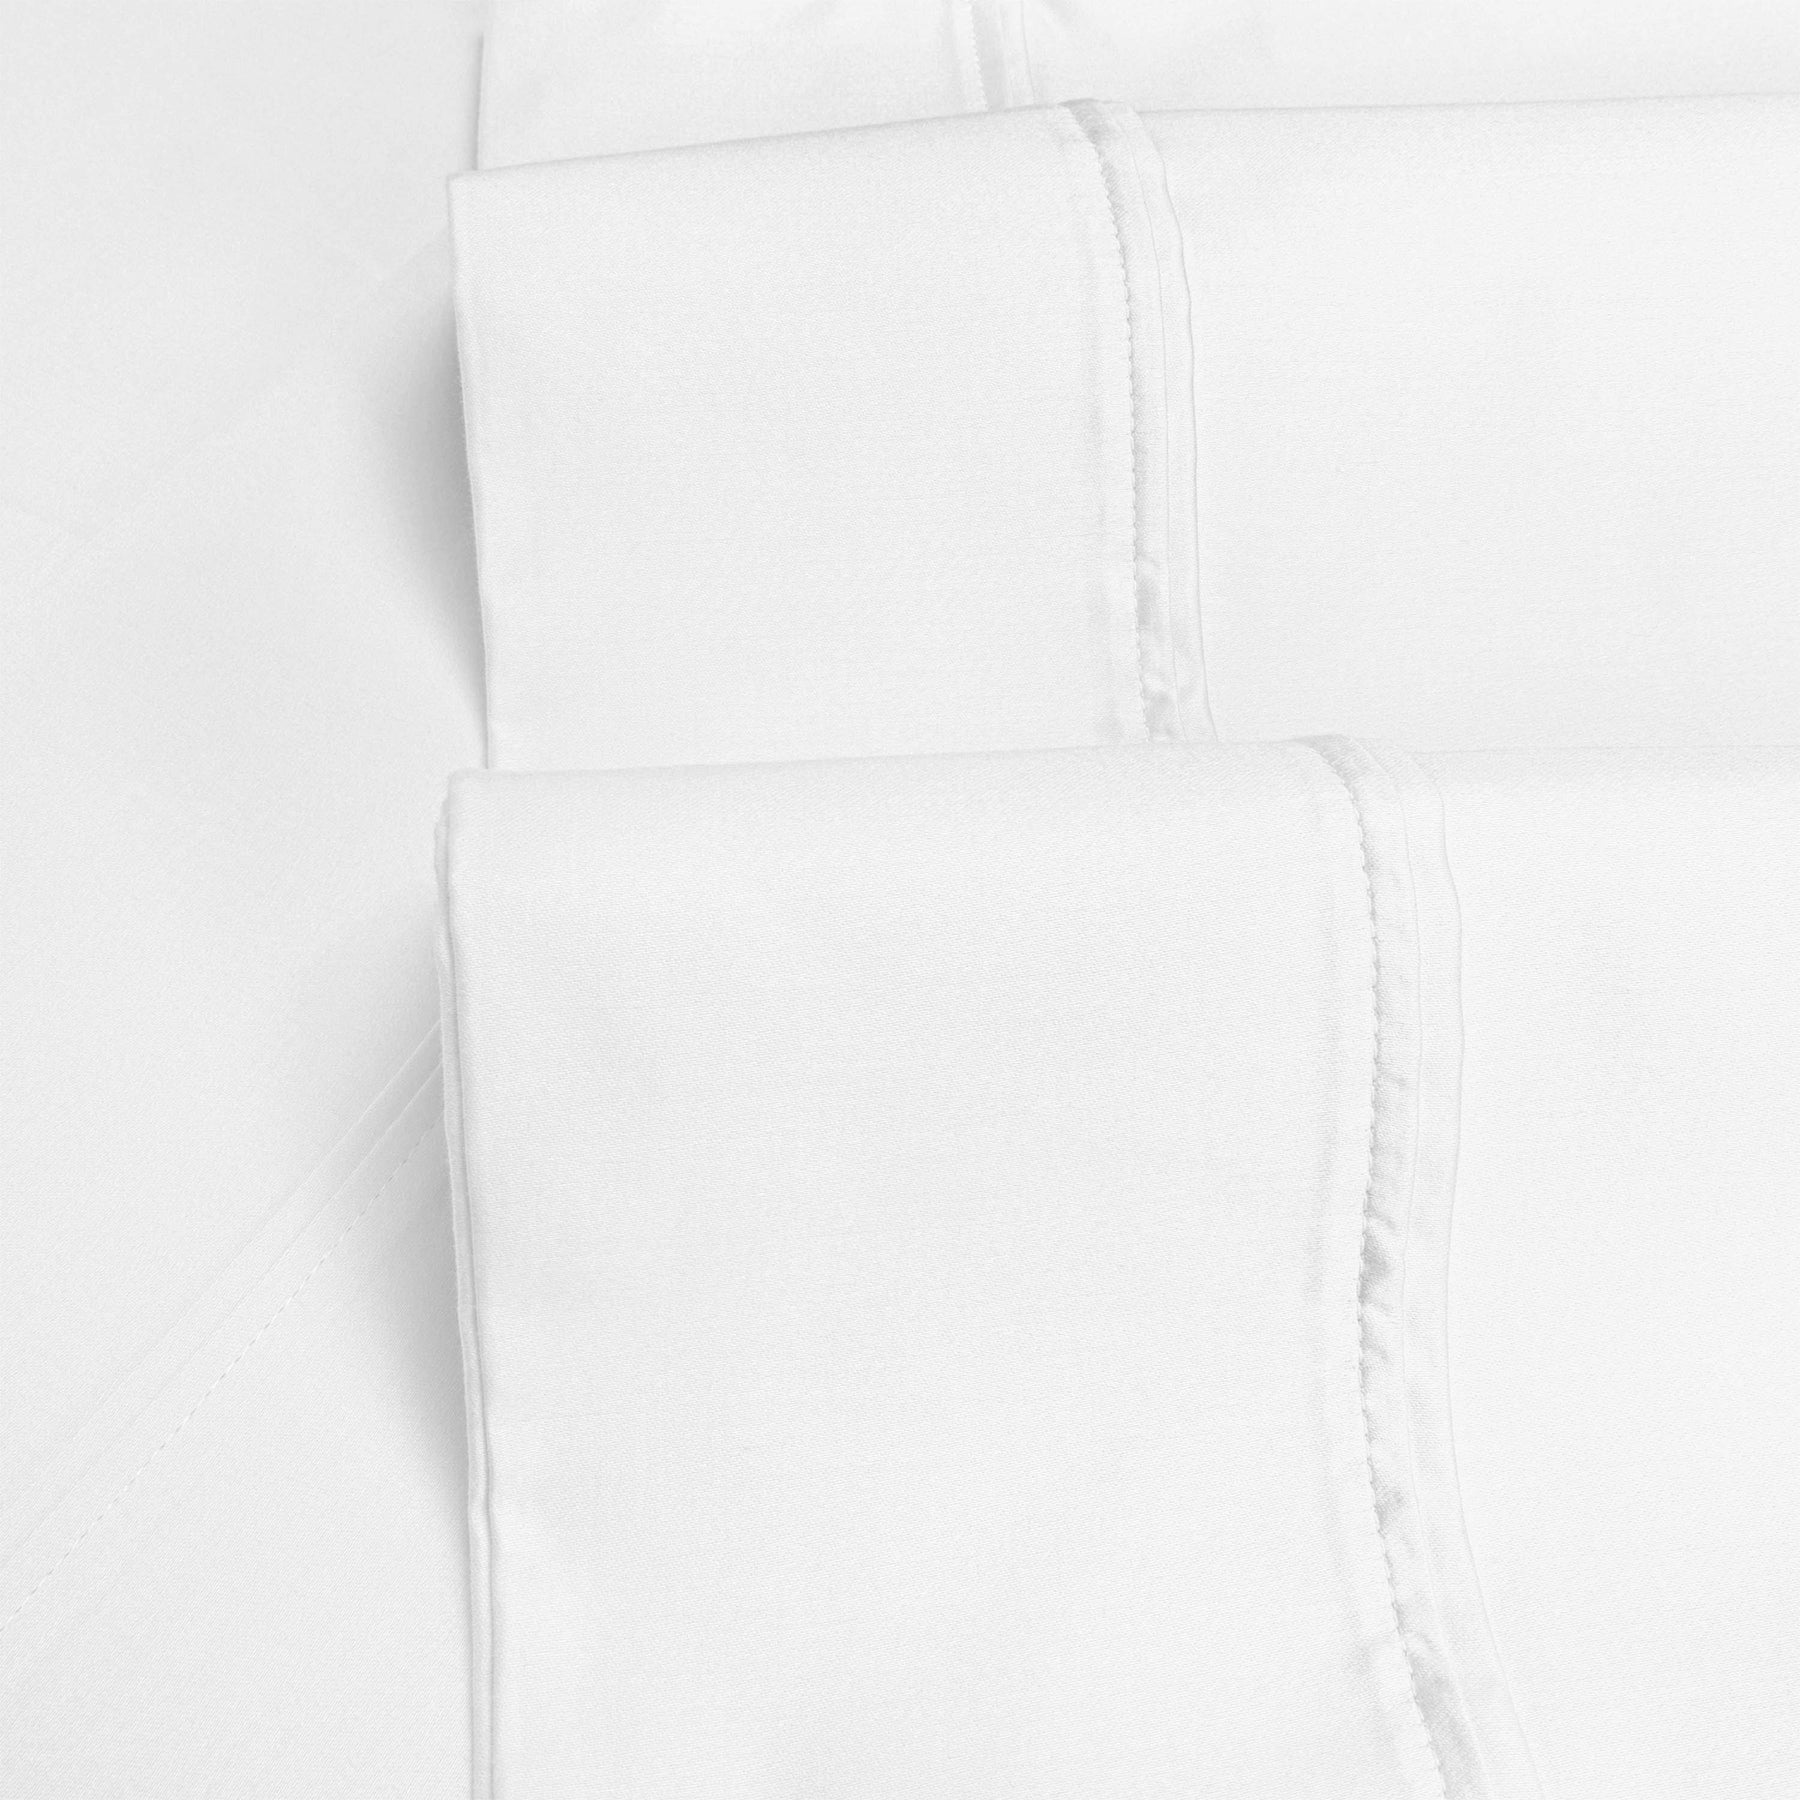 Egyptian Cotton 1200 Thread Count Eco-Friendly Solid Sheet Set - White